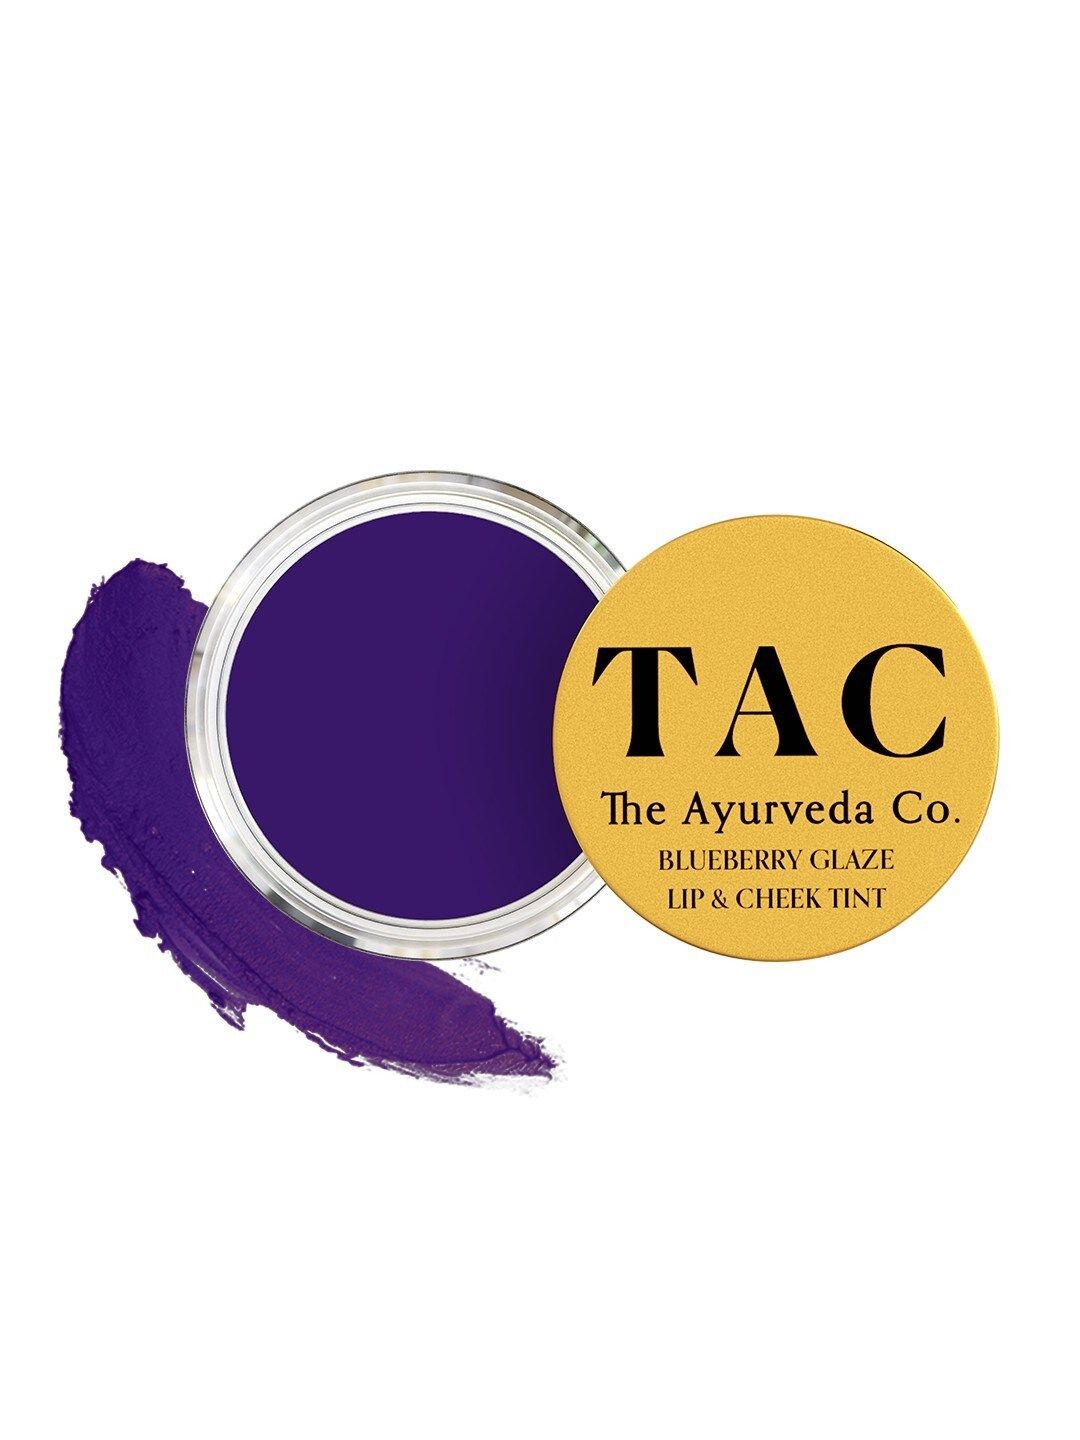 TAC The Ayurveda Co. Blueberry Glaze Lip & Cheek Tint Price in India